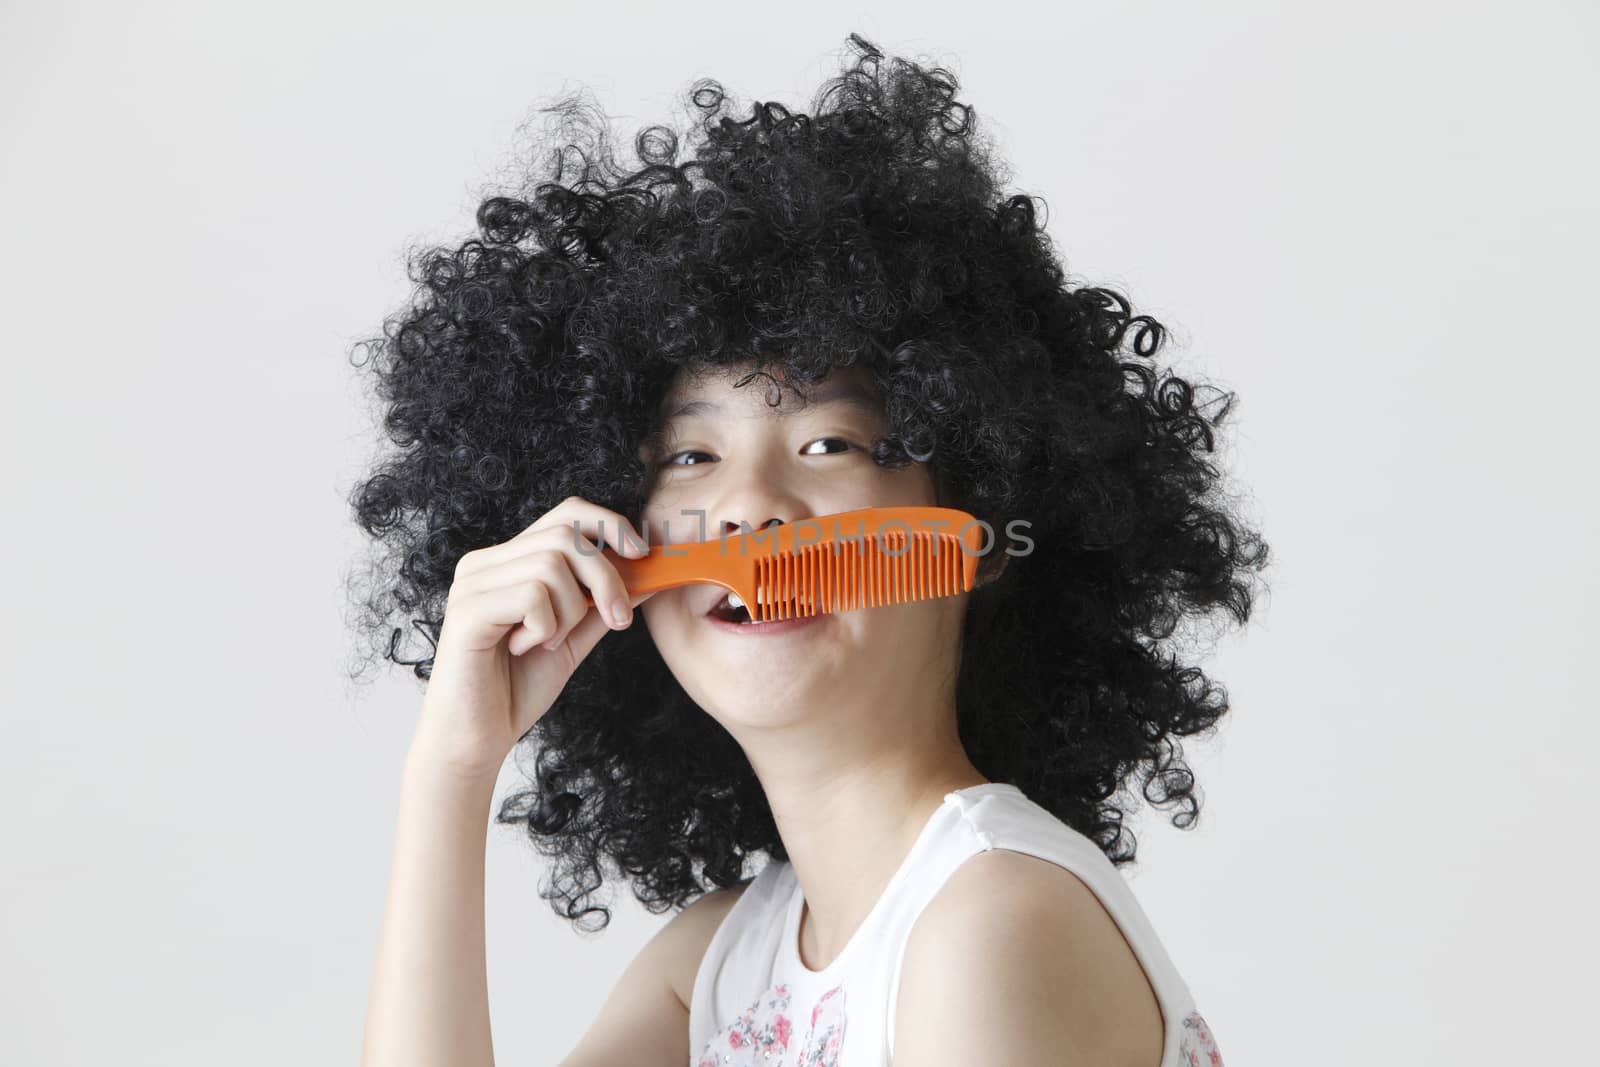 chinese girl wearing a big black wig holding a comb